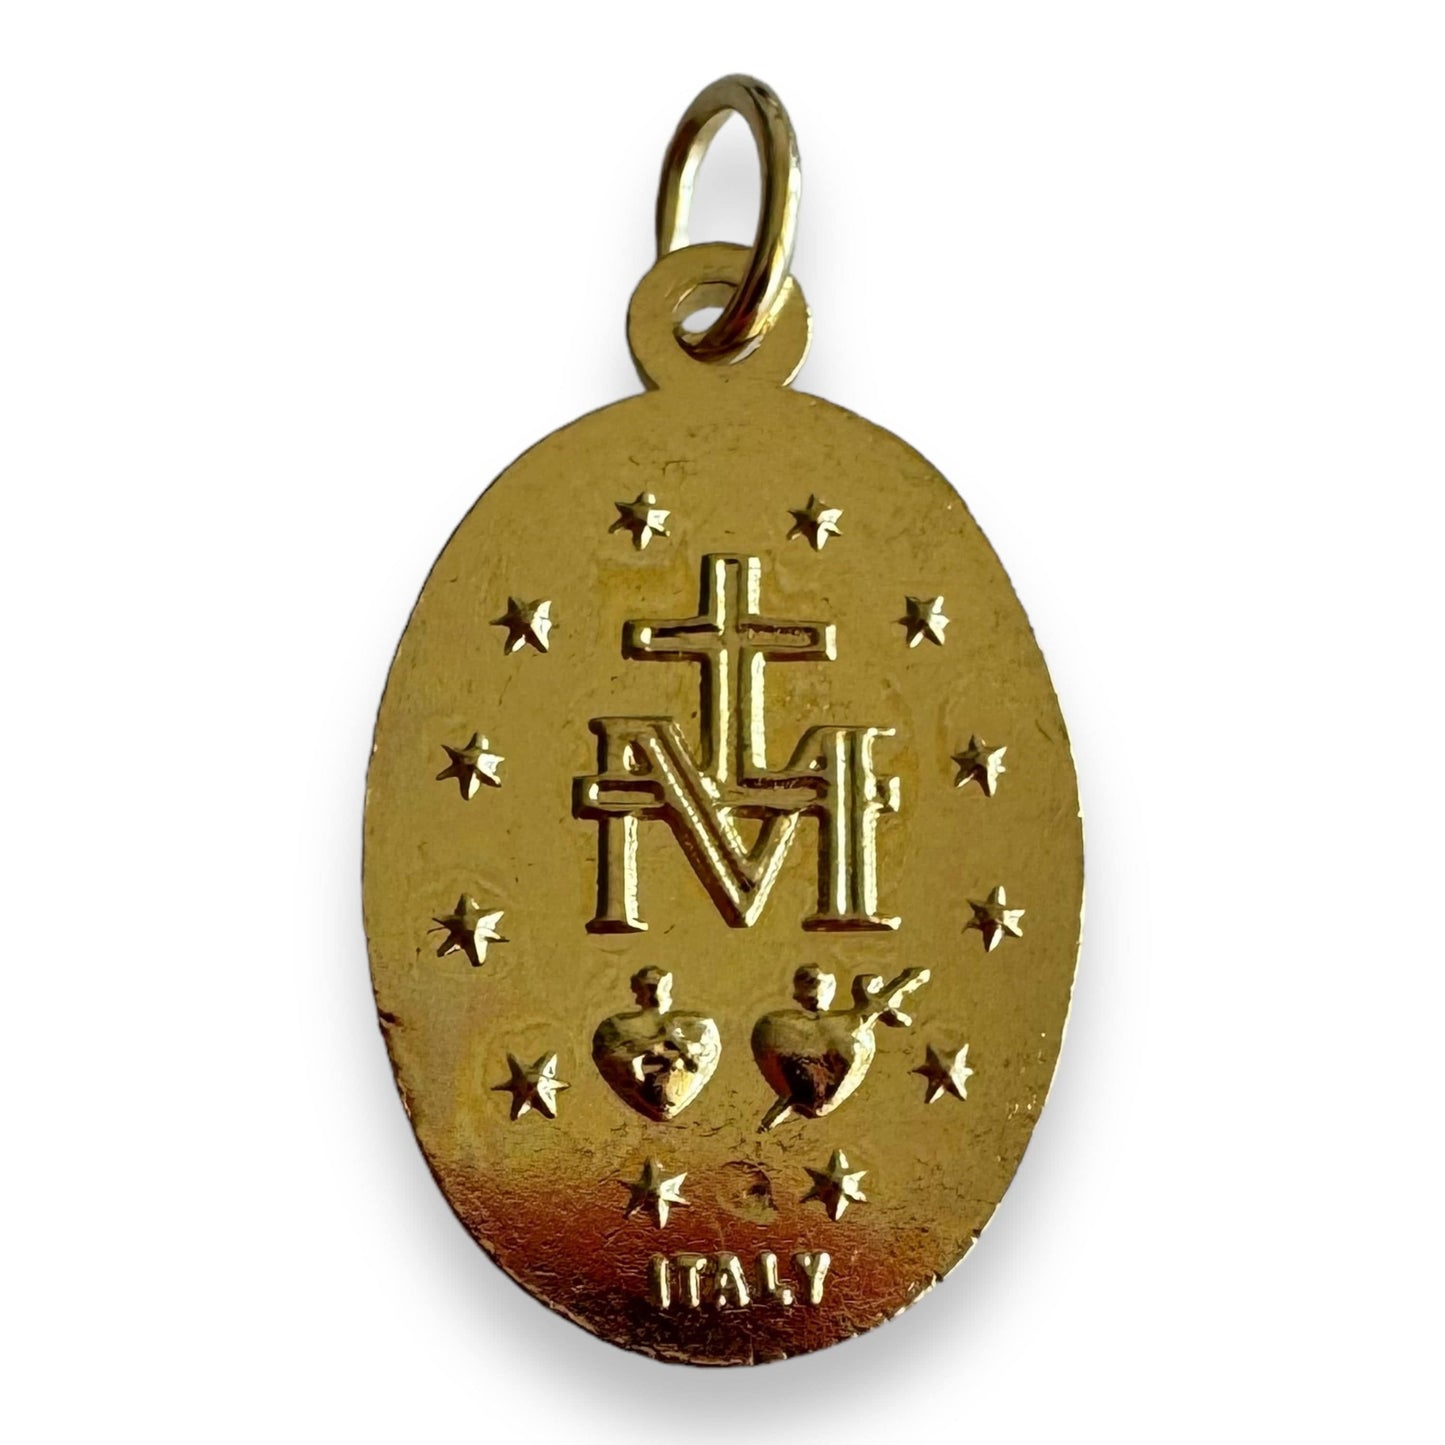 Catholically Medal 1 1/2" Golden Miraculous Medal Pendant - Blessed by Pope